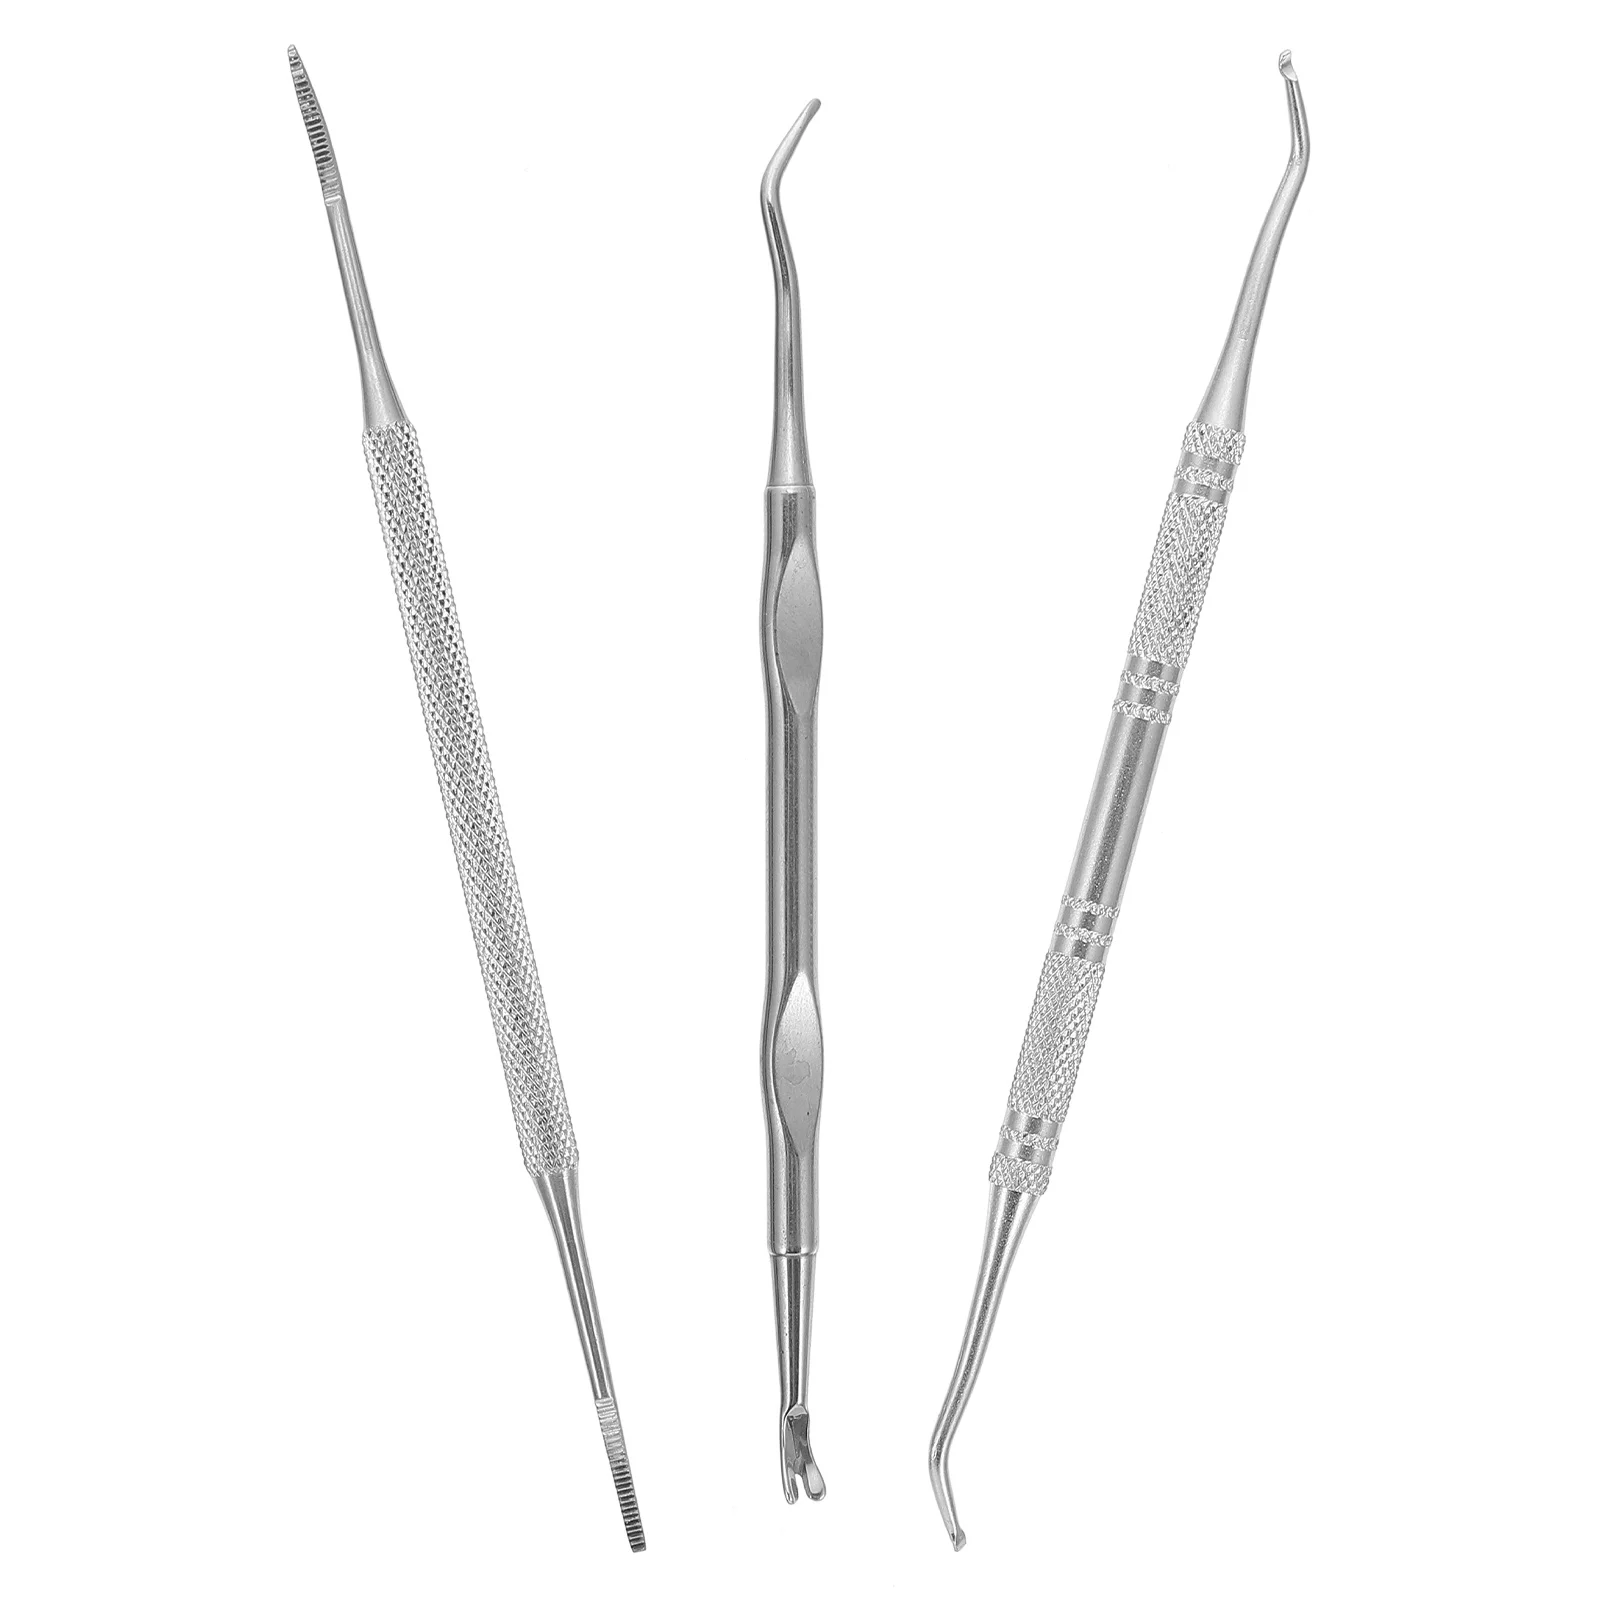 3Pcs Ingrown Toenail File Double-end Nail Cleaner Stainless Steel Tool Ingrown Toenail Lifter 188 288mm stainless steel labor saving arm height adjustable lifter handheld lift positioning pad woodworking clamp lift tools